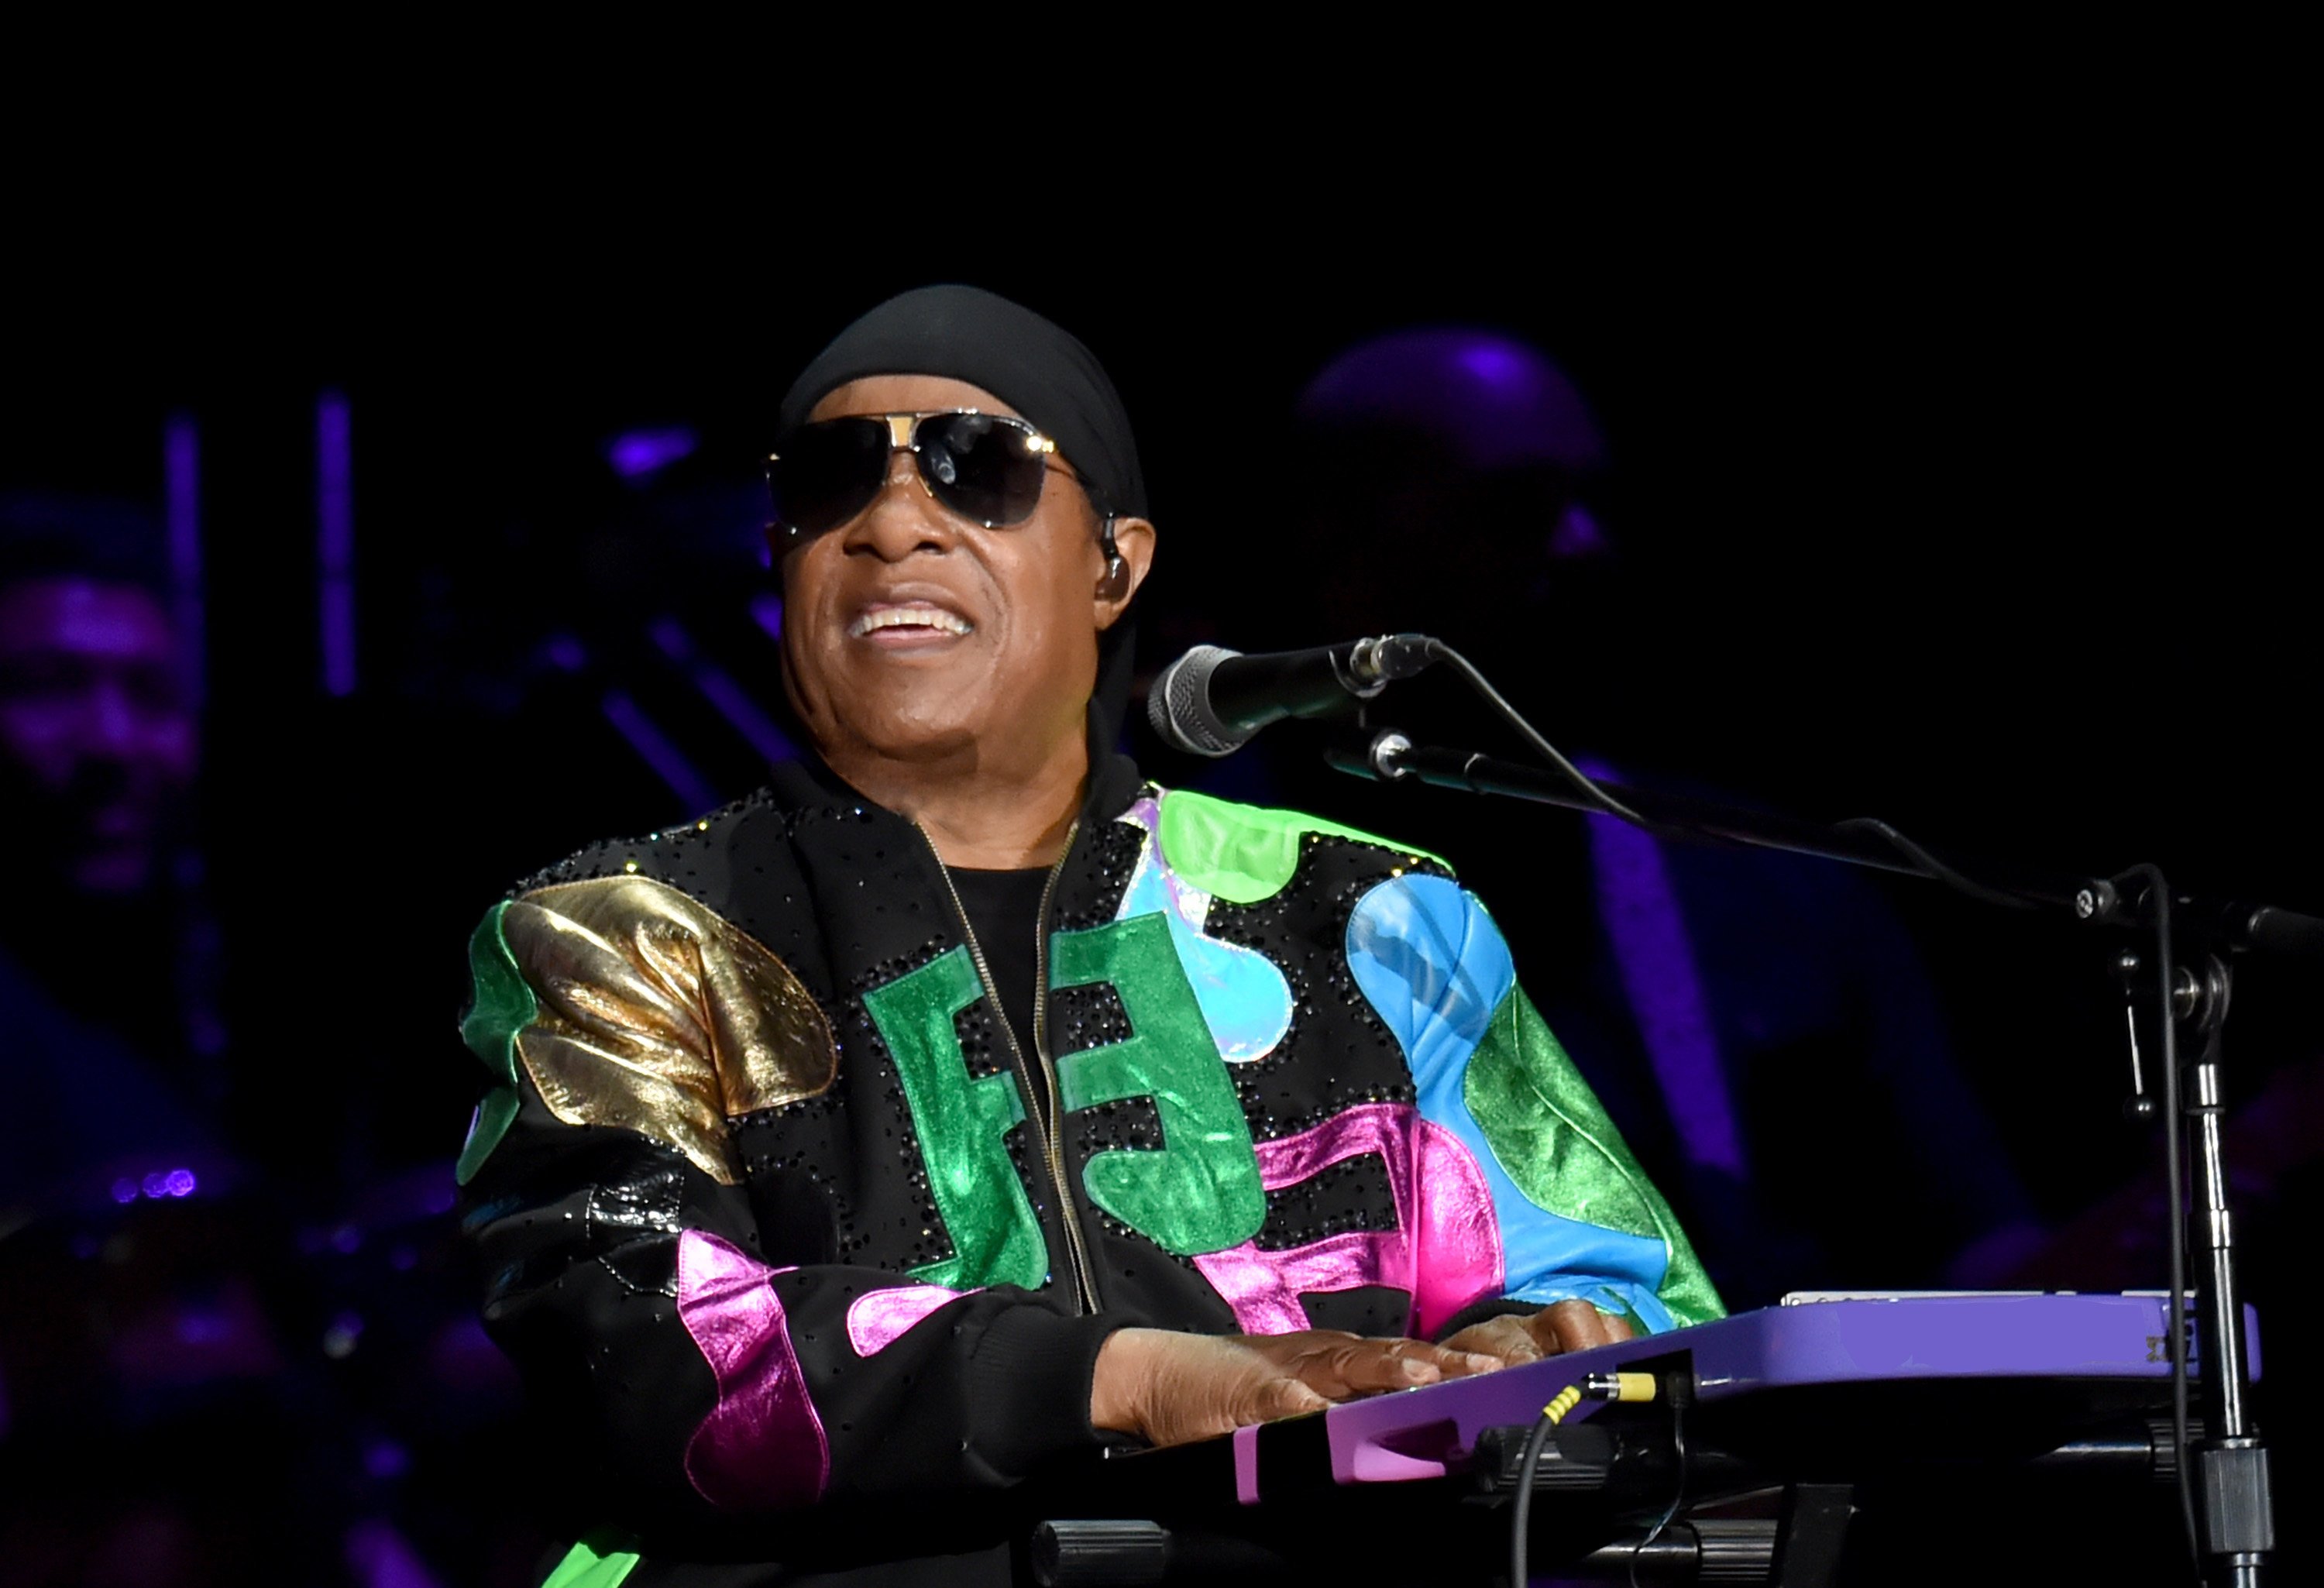 Stevie Wonder at the British Summer Time Hyde Park concert in 2019 in London, England. | Photo: Getty Images